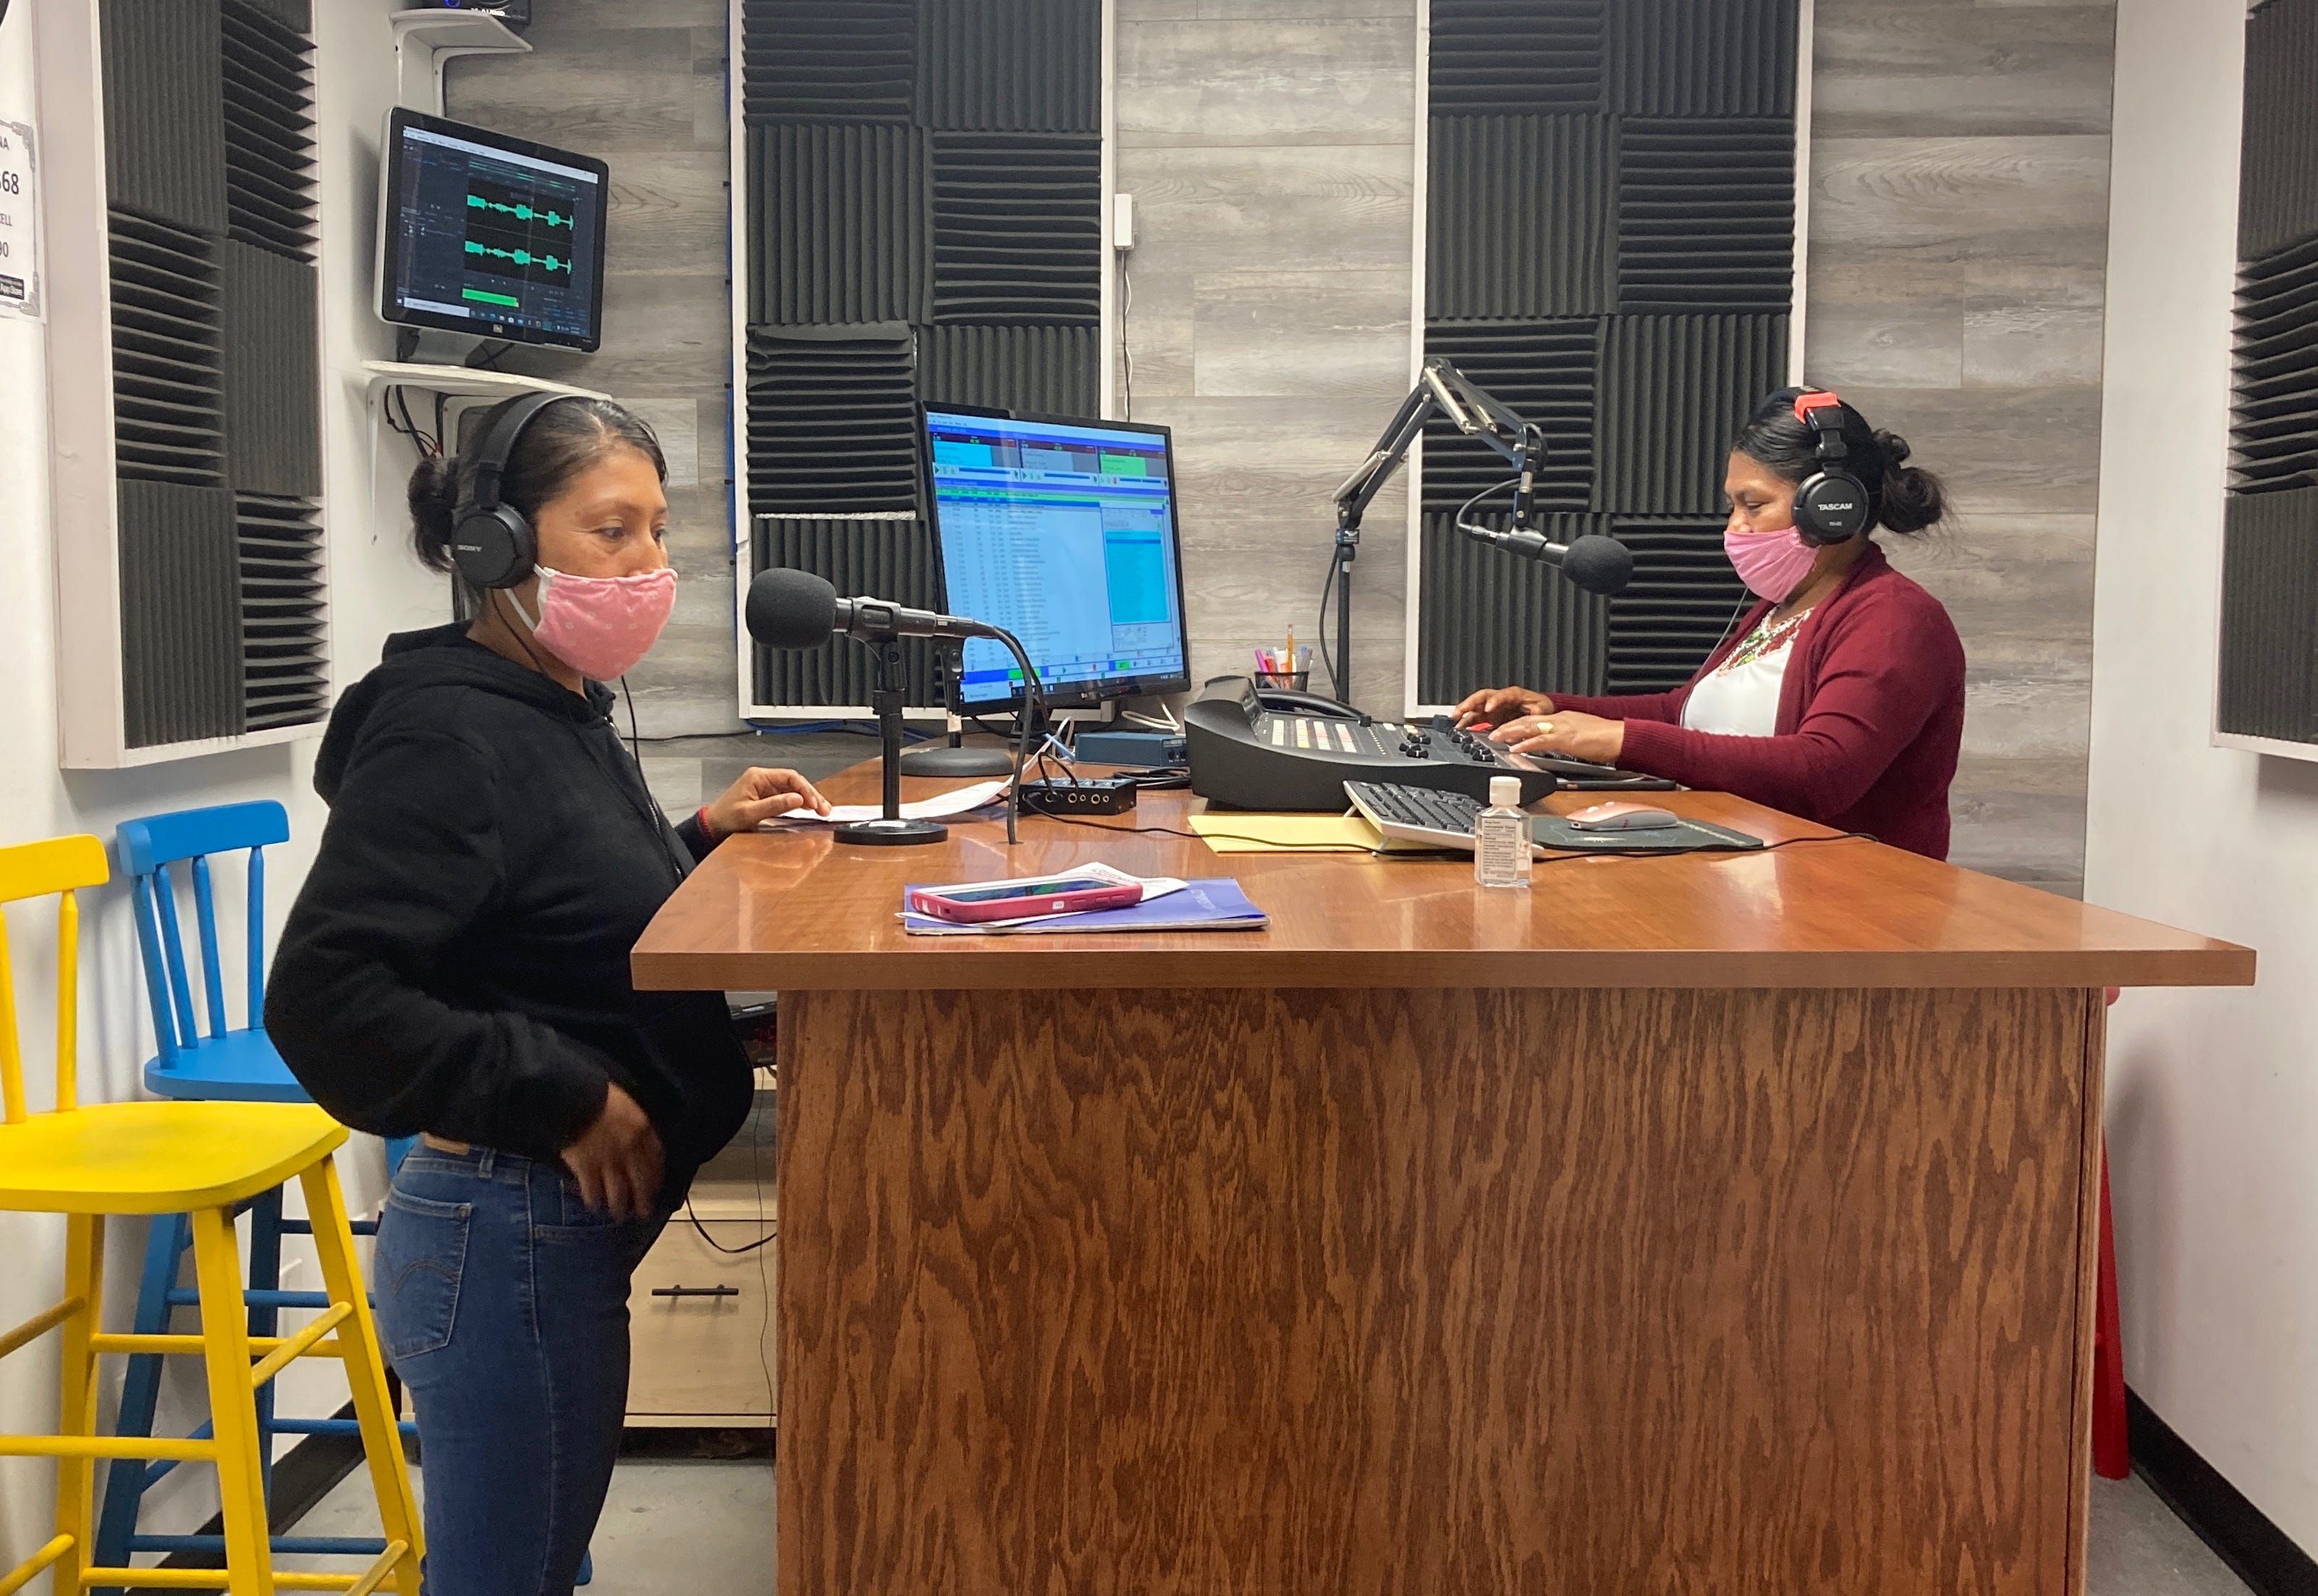 Lidia López and Flor López, who are not releated, broadcast "Voz de la Mujer Indígena" from Radio Indígena's programming booth in Oxnard in July. Image by Julia Knoerr. United States, 2020.